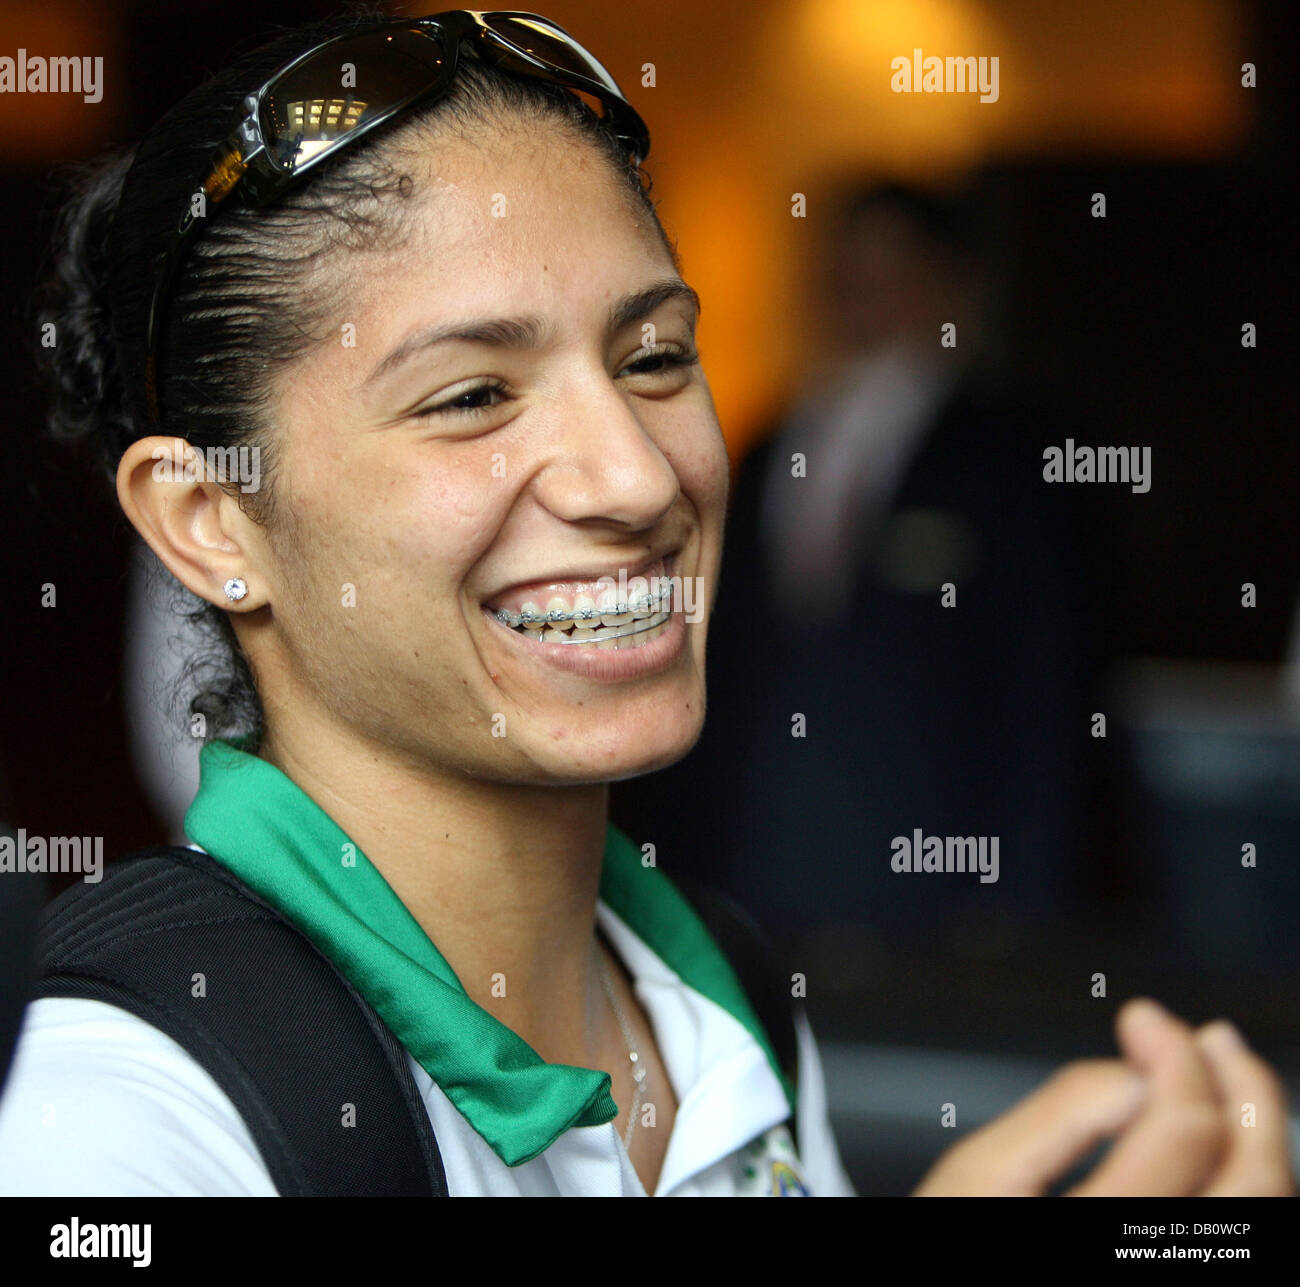 Brazilian international Cristiane shows them teeth and braces arrivoing to the team's hotel Pudong Shangri-La of Shanghai, China, 28 September 2007. Brazil faces Germany for the promising FIFA Women's World Cup Final on 30 September. Photo: Carmen Jaspersen Stock Photo